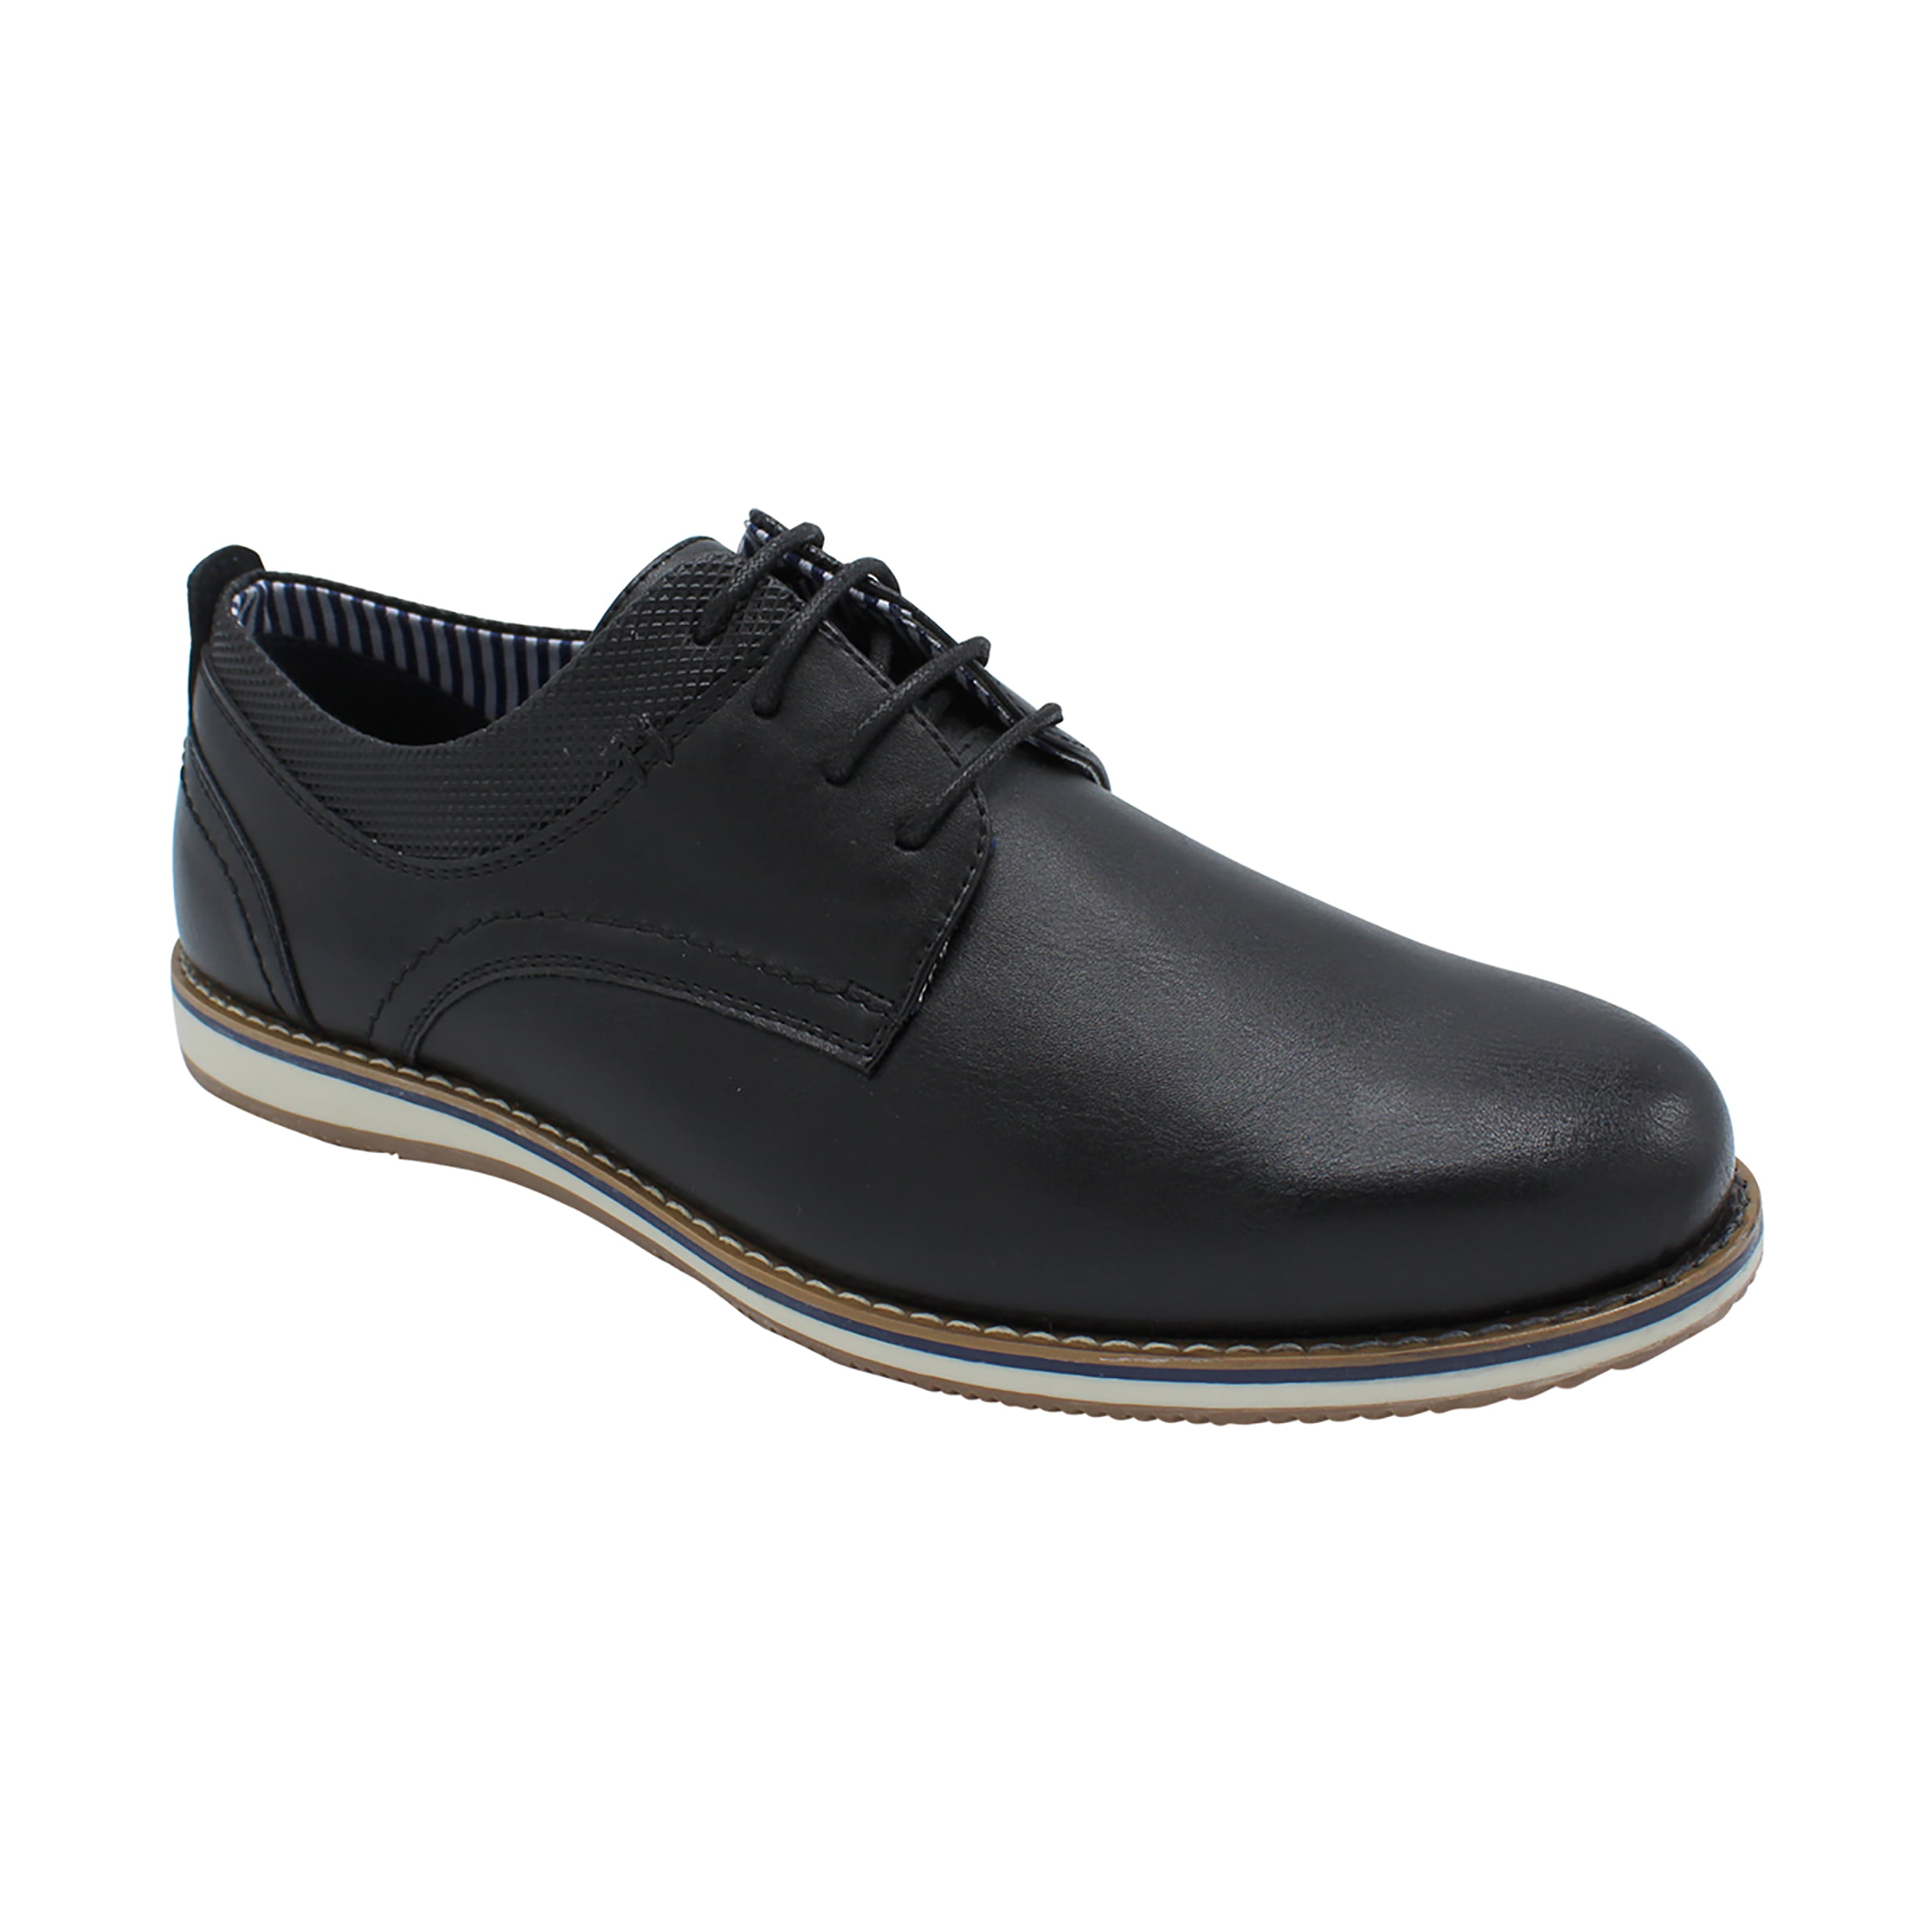 Mario Lopez - Men’s Shoes Lace Up Formal Business Casual Comfortable ...